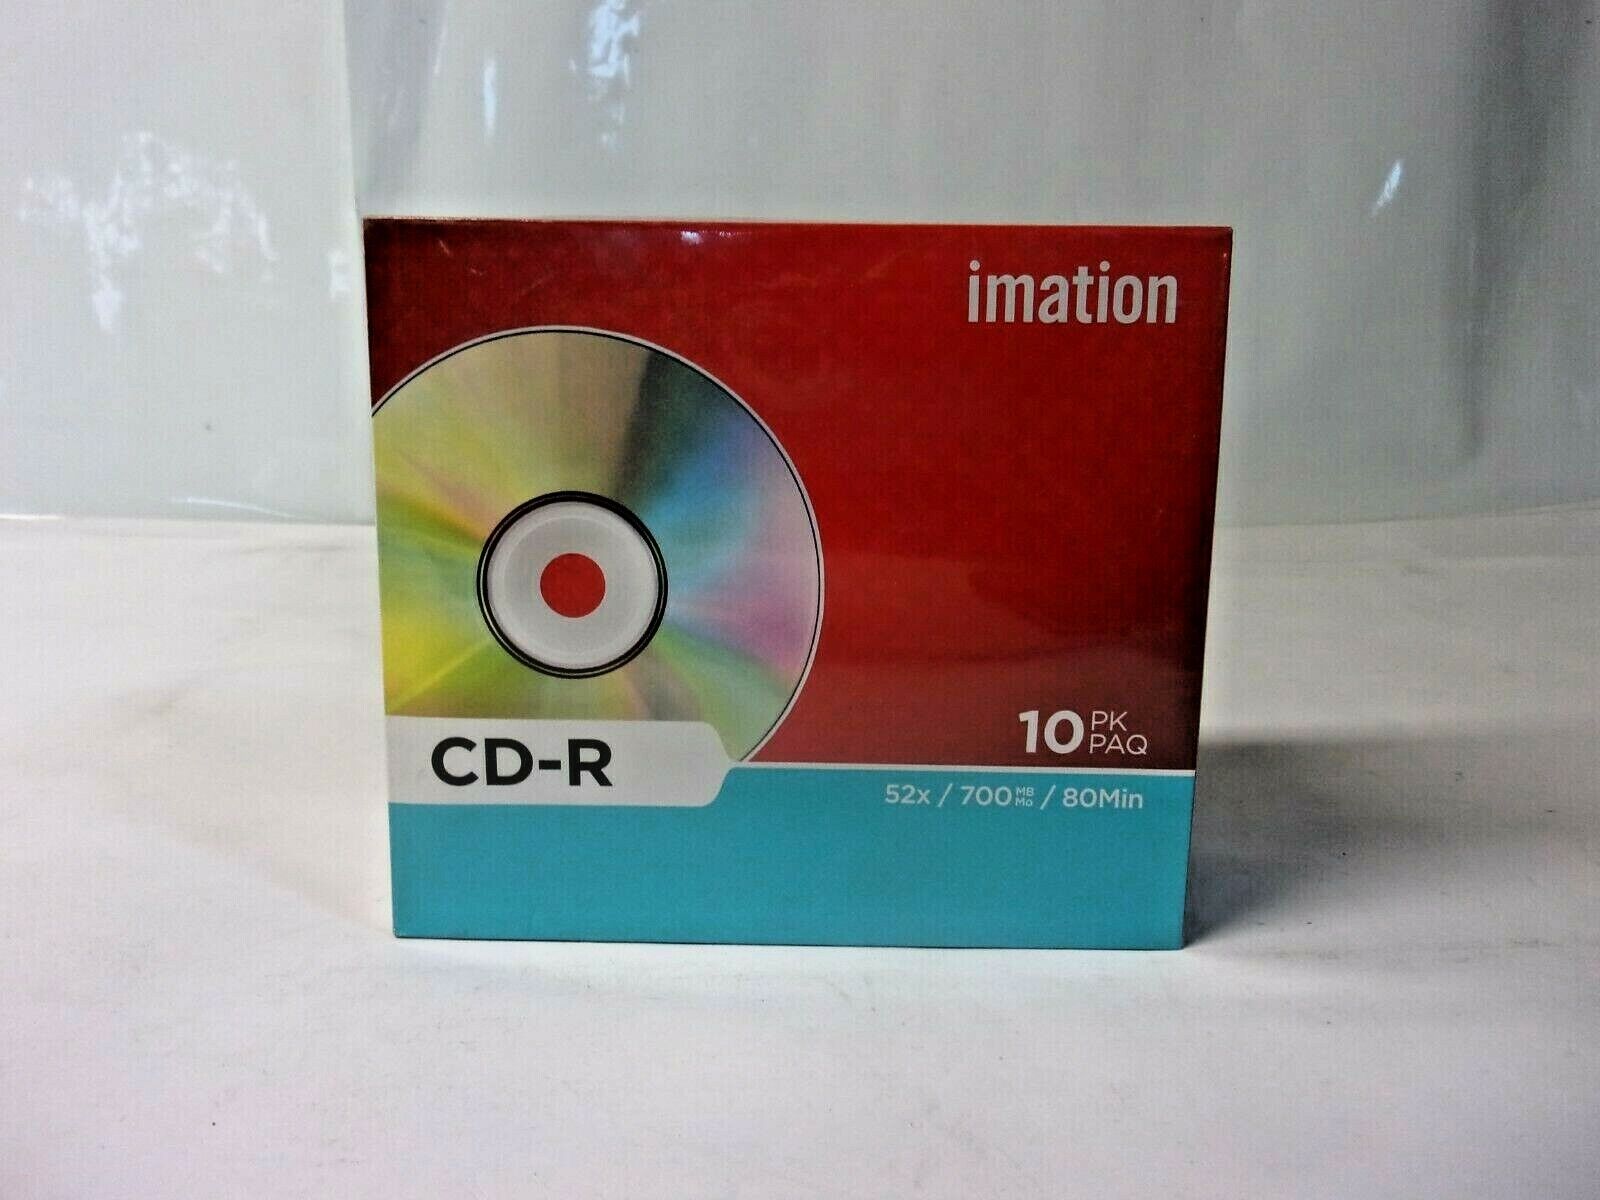 Imation CD-R Blank CD Discs - 52x / 700 MB / 80 Min - 10 Pack - NEW